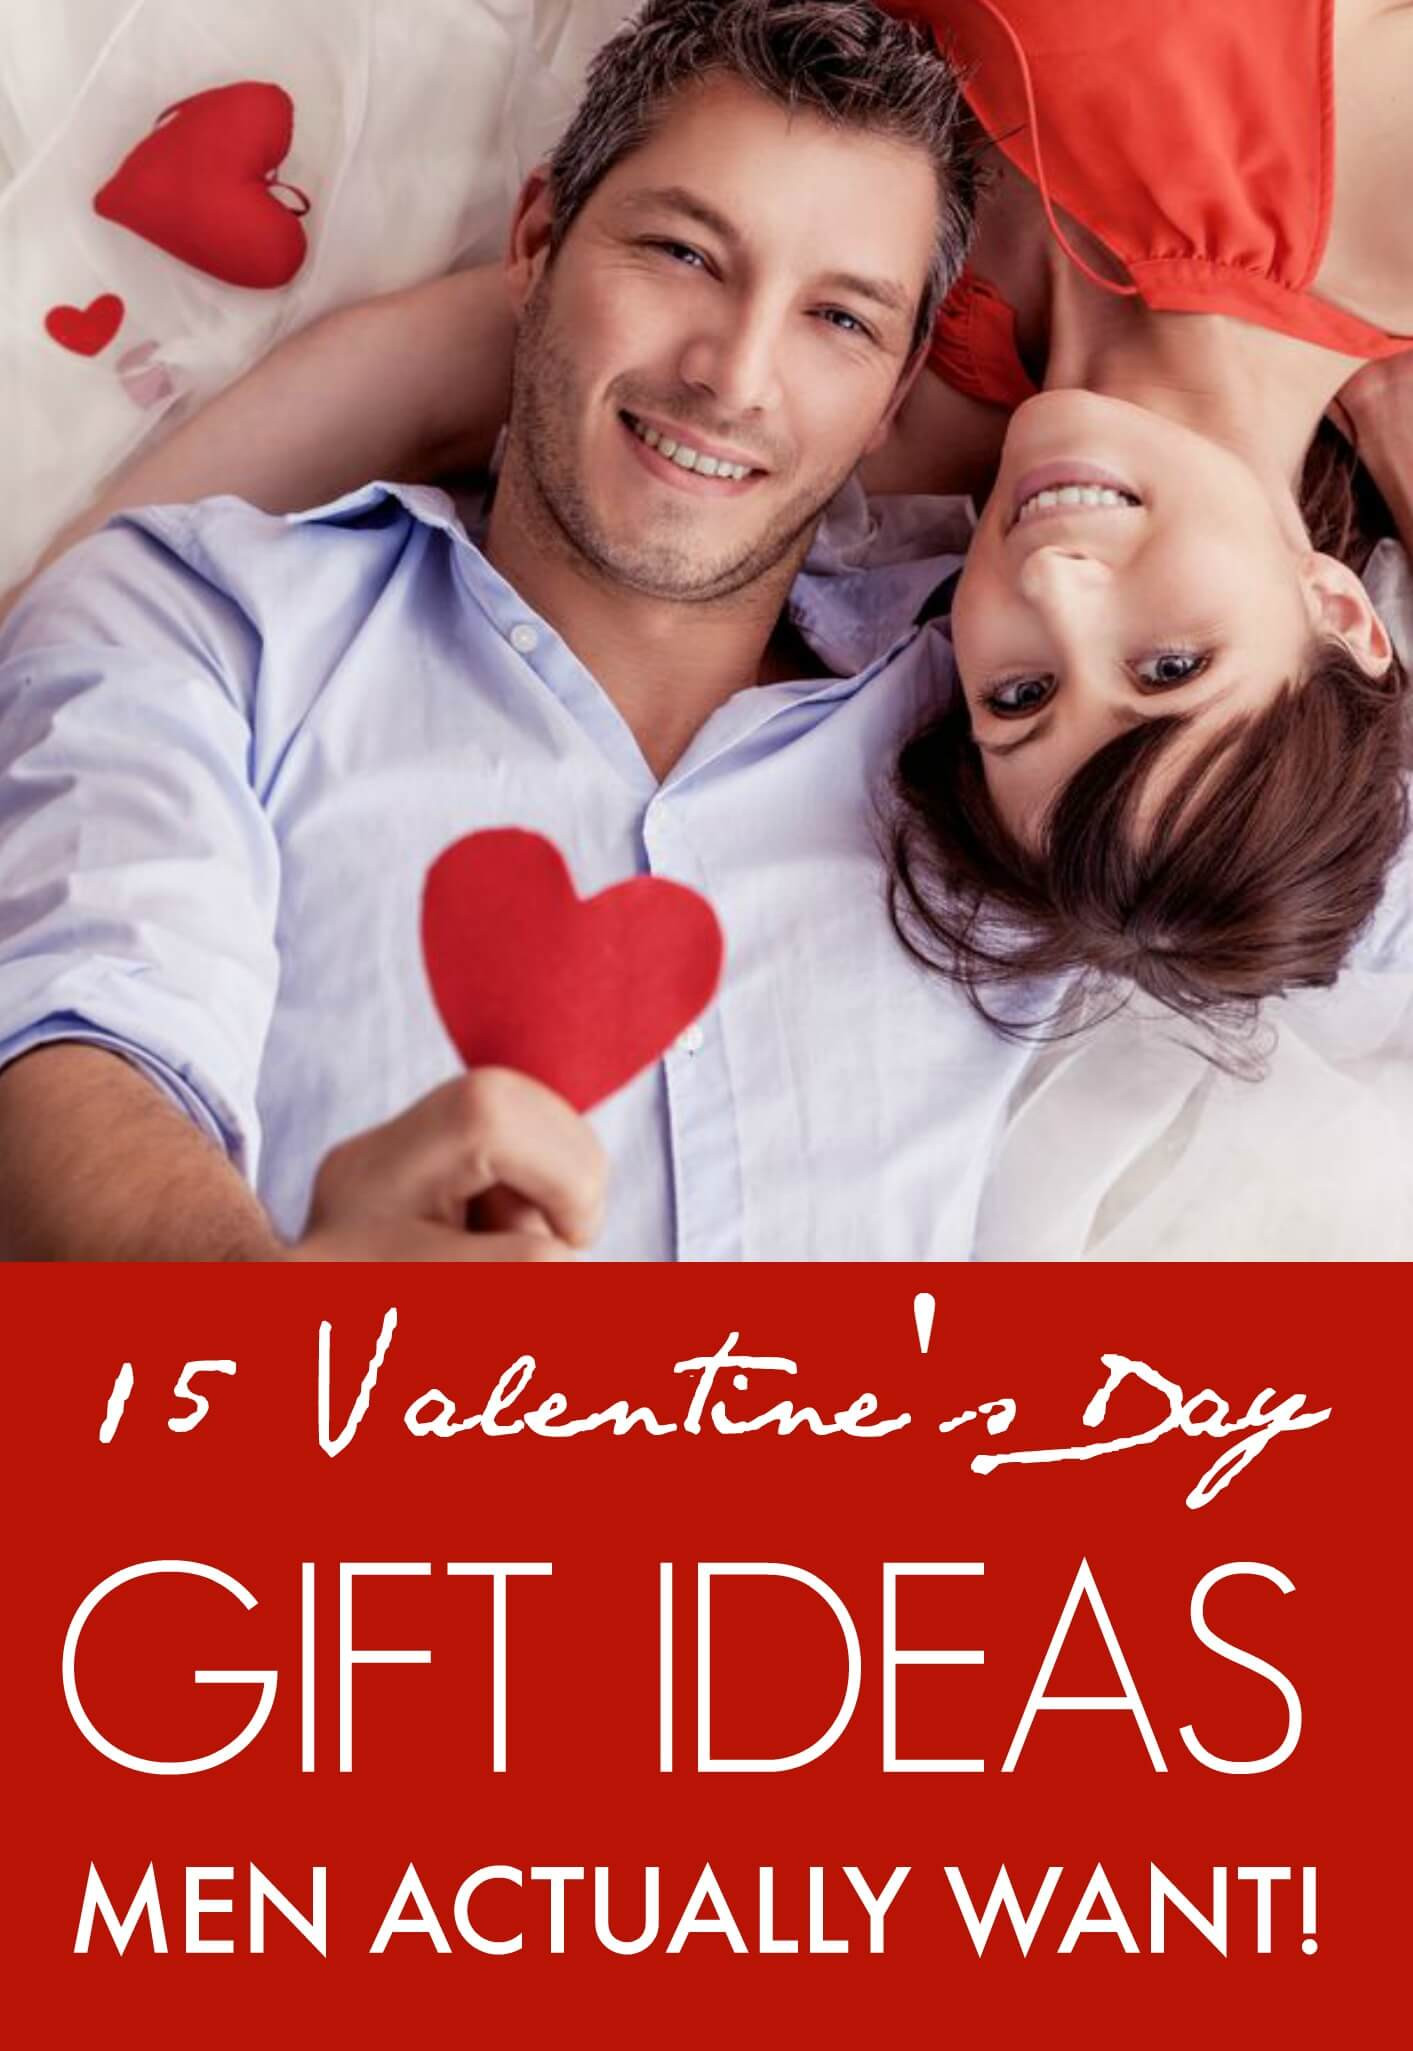 Guy Gift Ideas For Valentines Day
 15 Valentine’s Day Gift ideas Men Actually Want